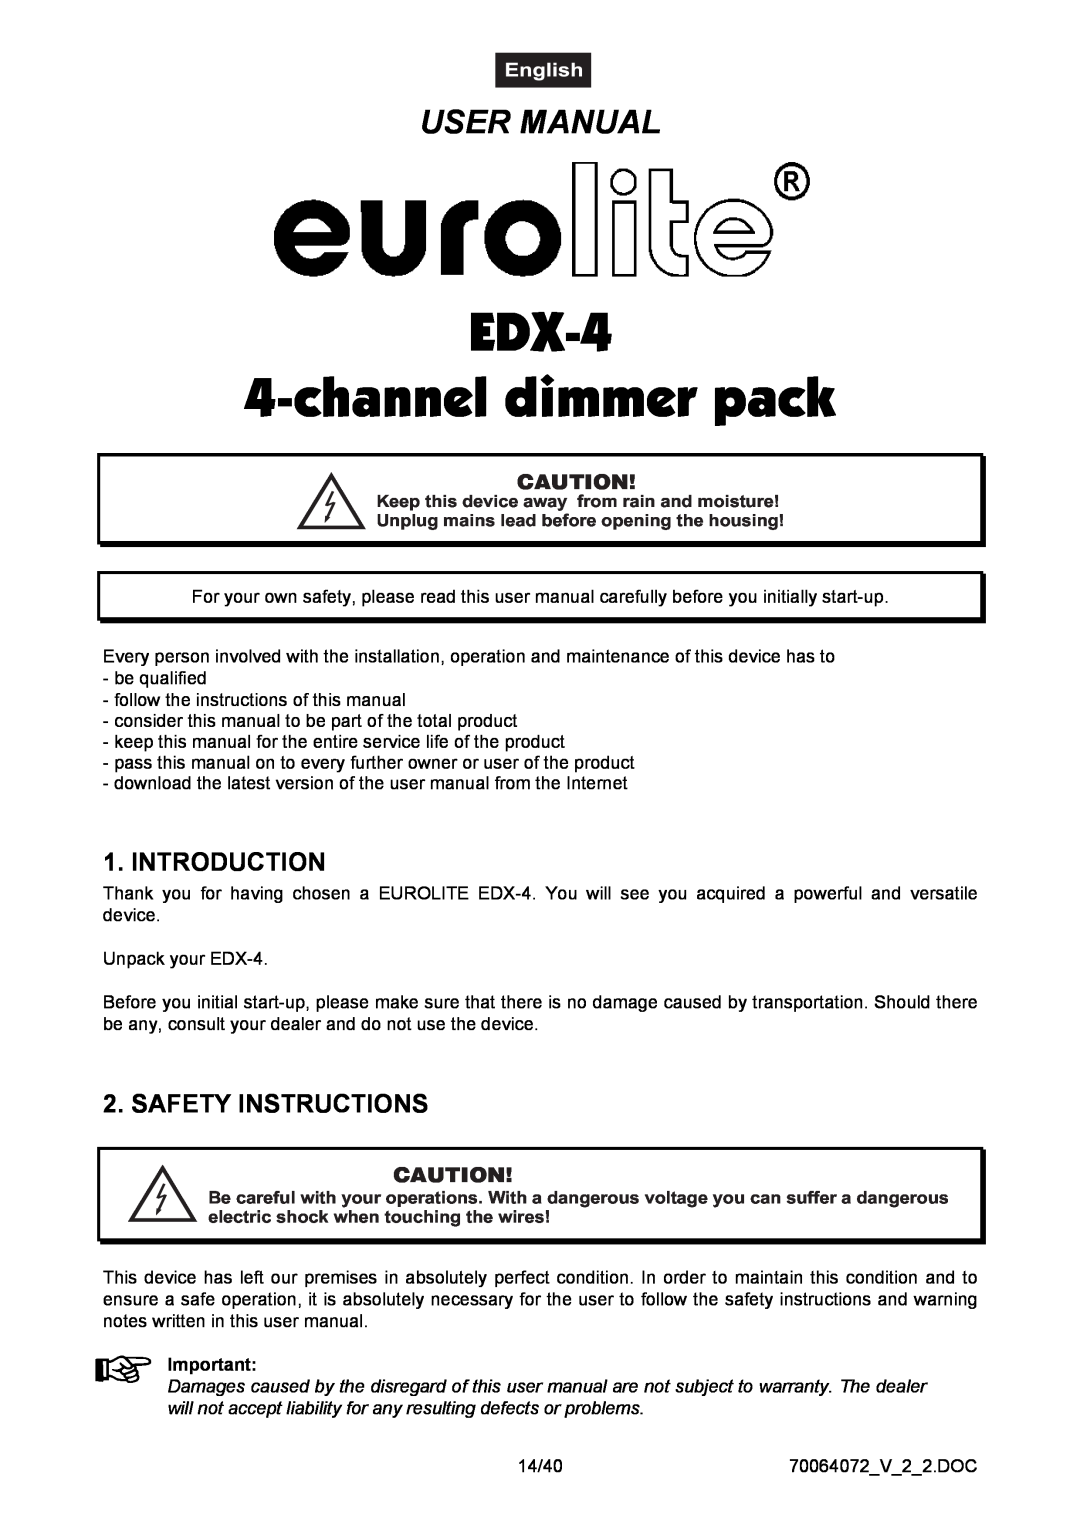 EuroLite Cases 4-channel DMX dimmer pack EDX-4 4-channel dimmer pack, User Manual, Introduction, Safety Instructions 